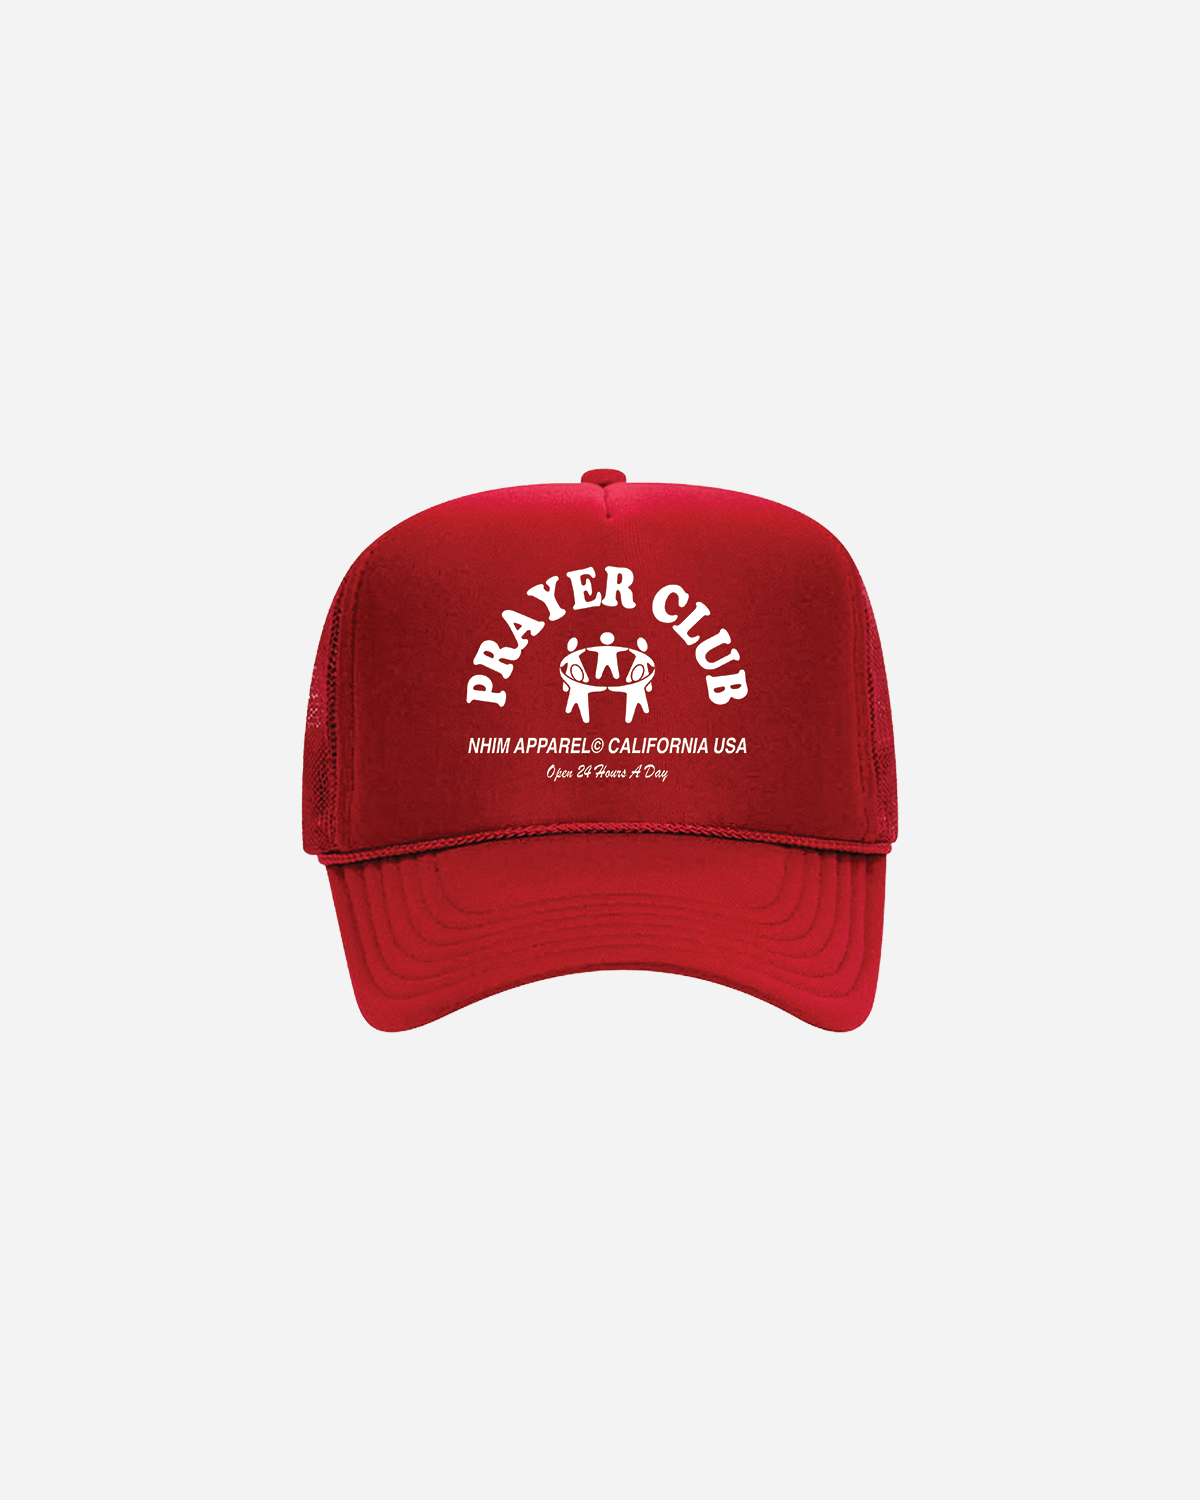 Prayer Club red colored christian trucker hat with white graphic of people in a circle made by NHIM APPAREL christian clothing brand